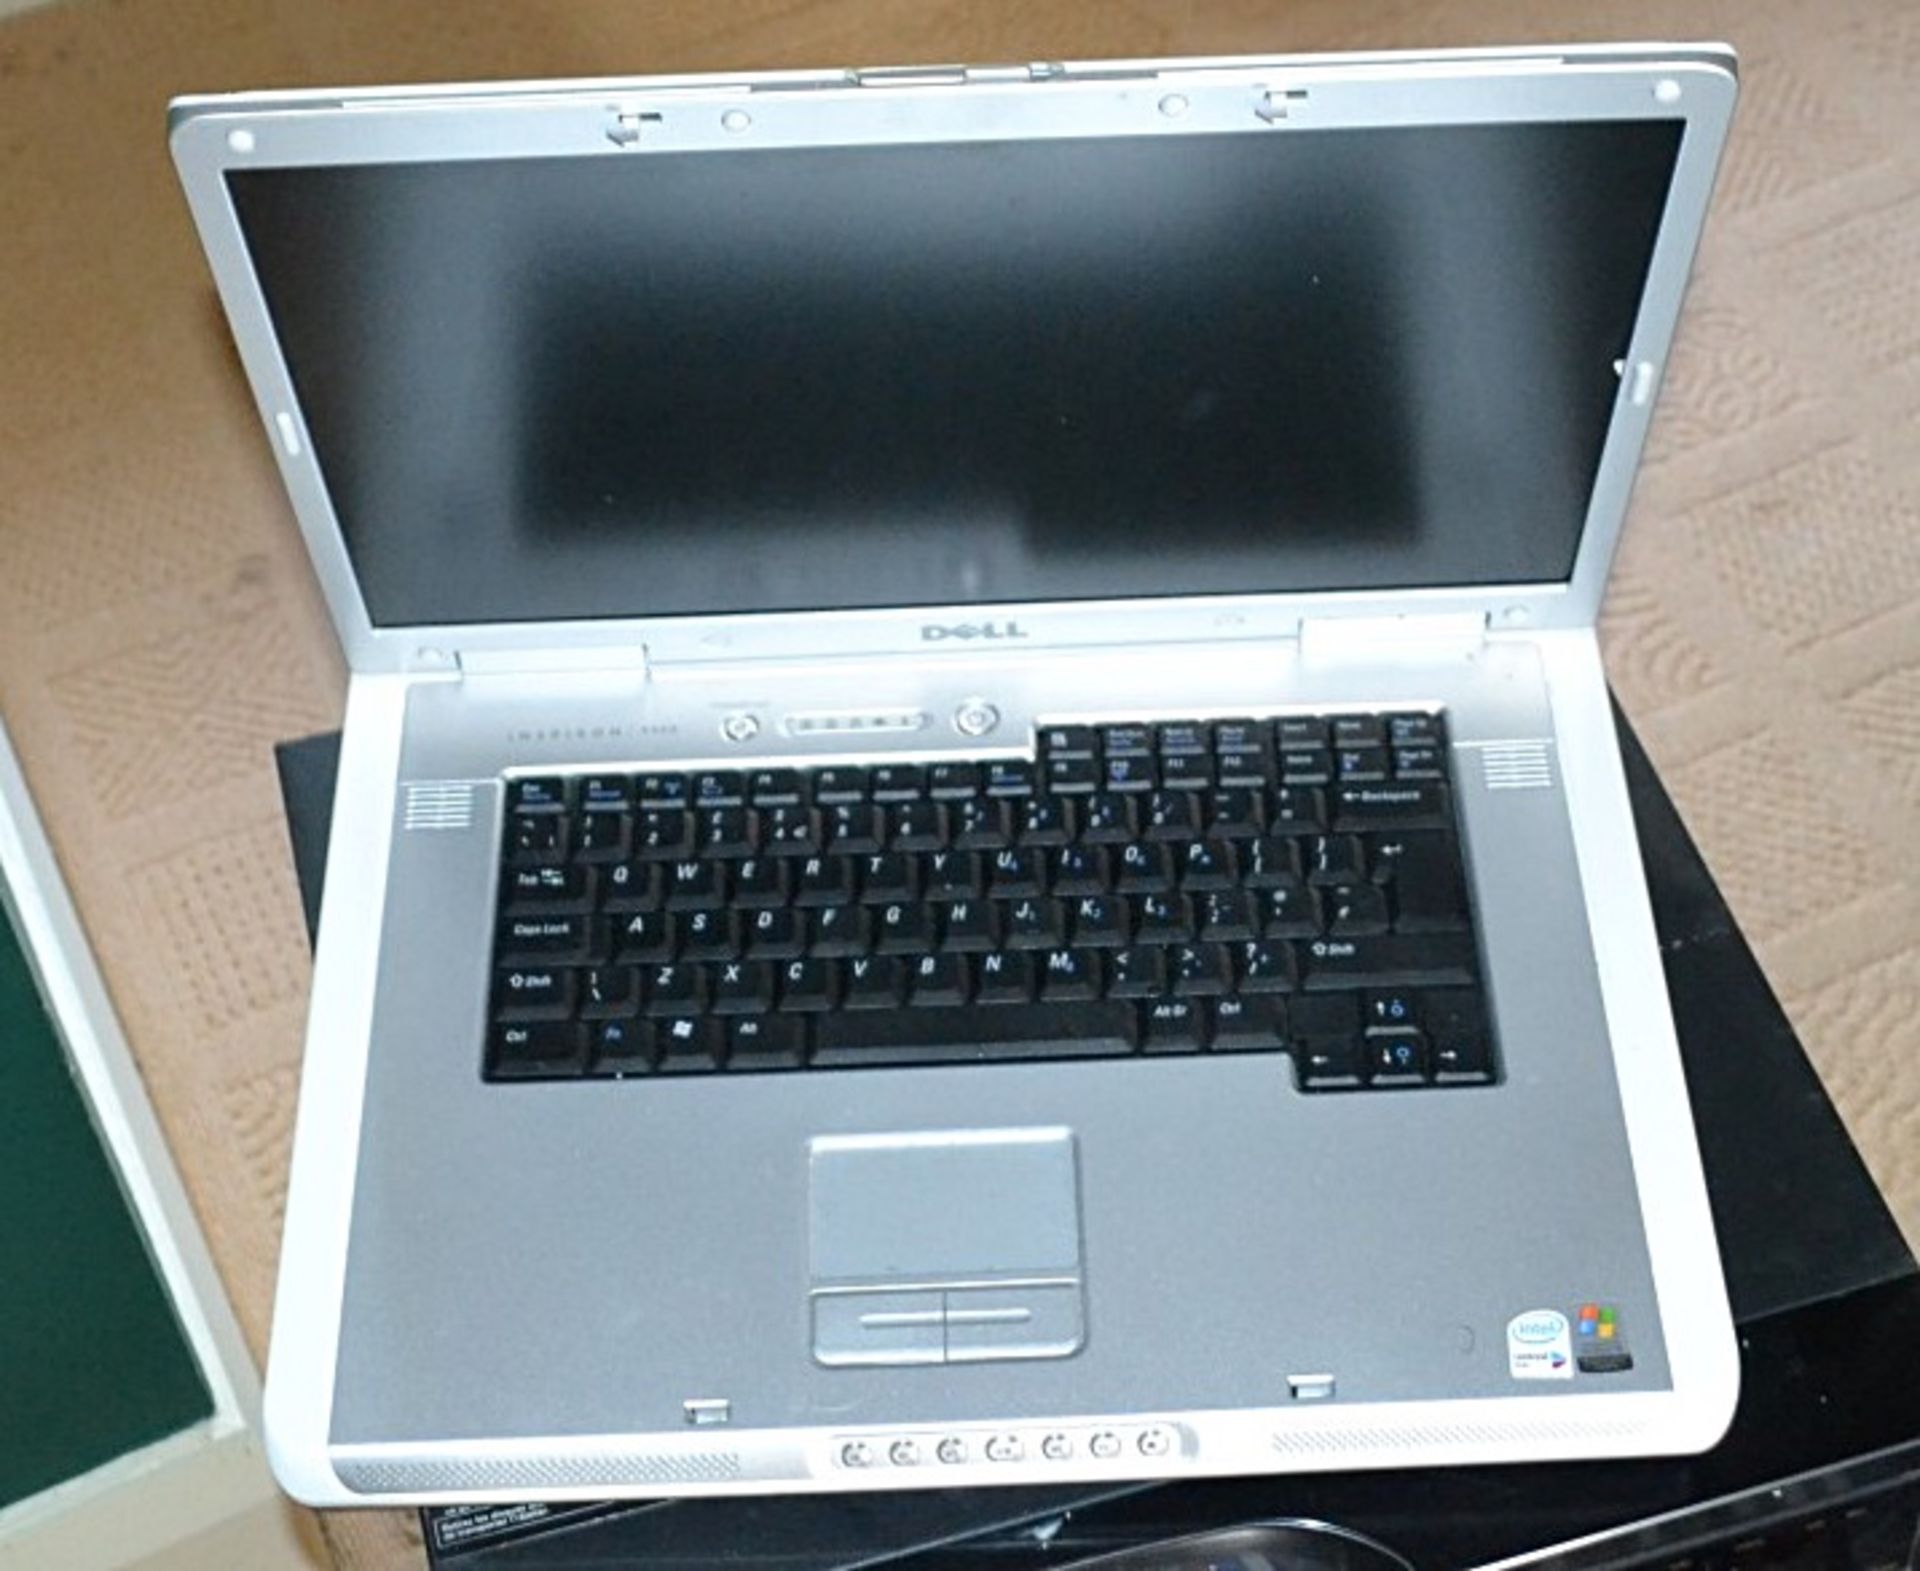 1 x Dell Inspiron 9400 17" Laptop With PSU **No Hard Drive** Preowned In Good Condition - Ref: